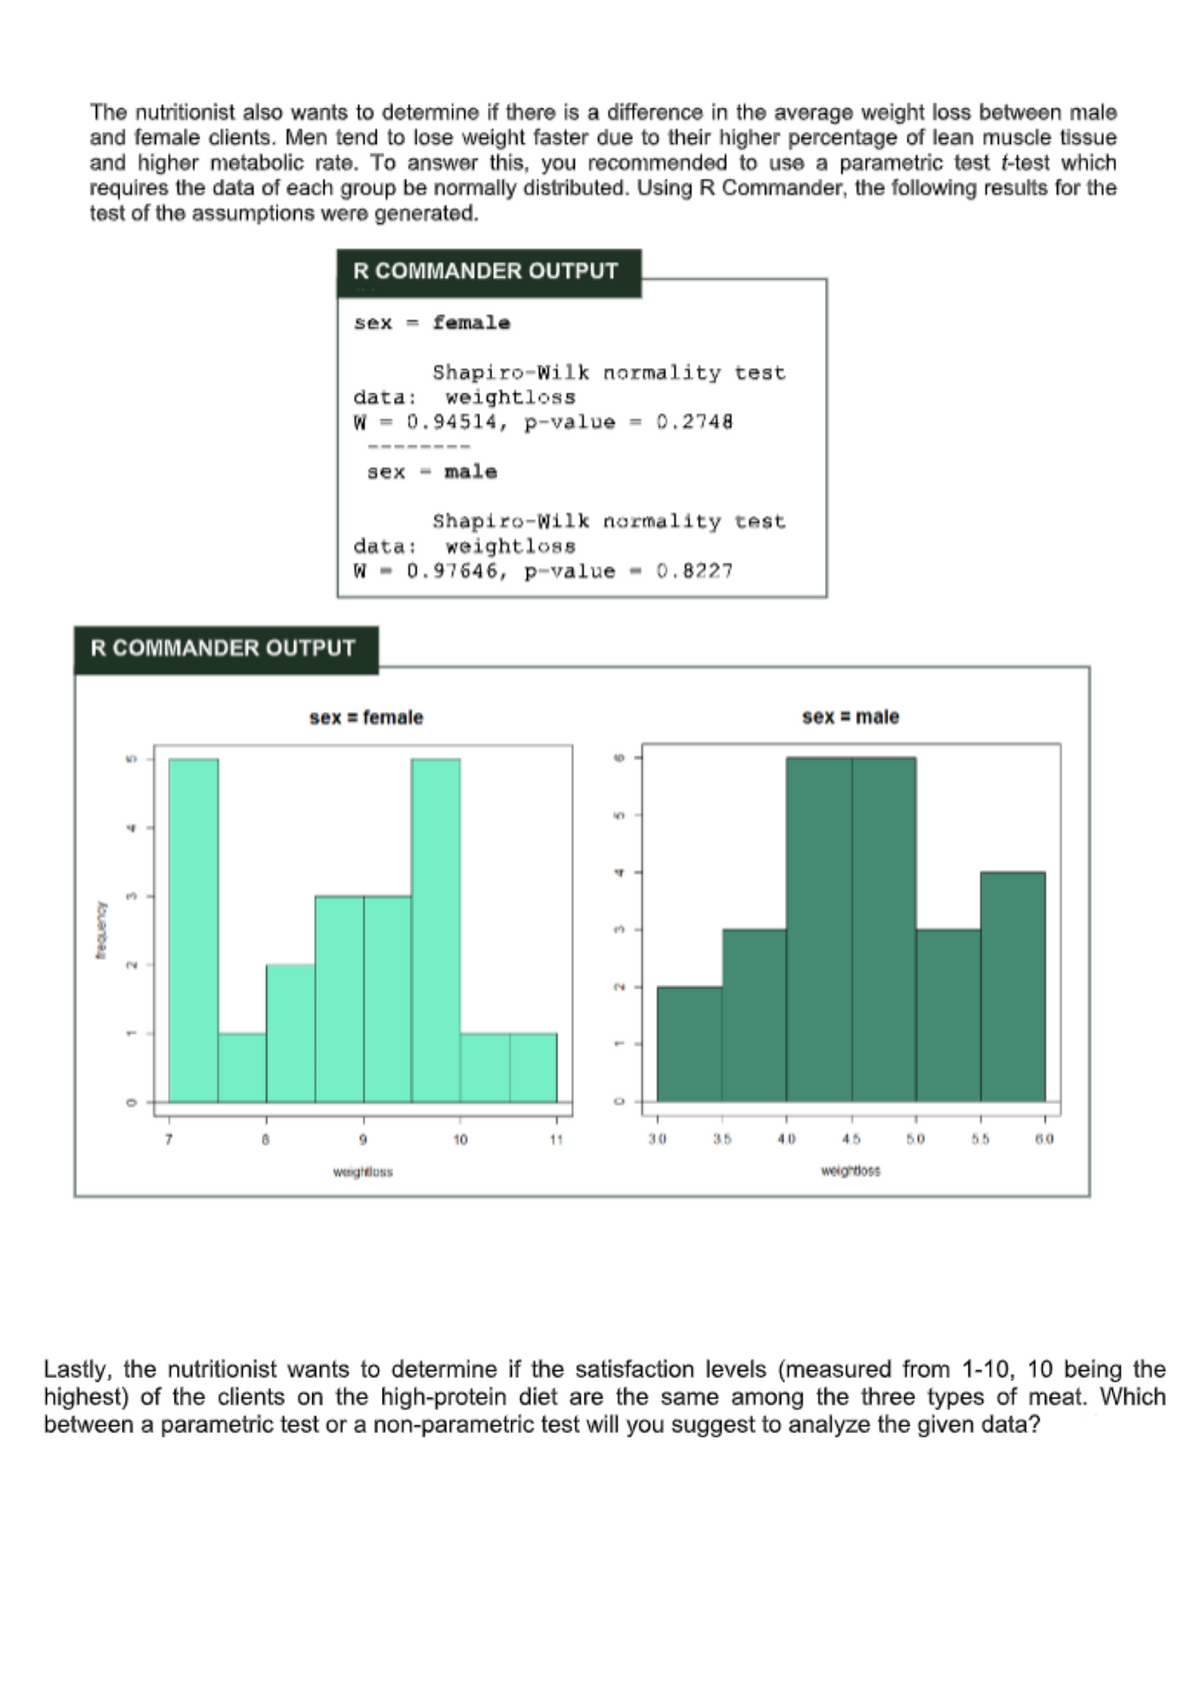 The nutritionist also wants to determine if there is a difference in the average weight loss between male
and female clients. Men tend to lose weight faster due to their higher percentage of lean muscle tissue
and higher metabolic rate. To answer this, you recommended to use a parametric test t-test which
requires the data of each group be normally distributed. Using R Commander, the following results for the
test of the assumptions were generated.
R COMMANDER OUTPUT
sex = female
Shapiro-Wilk normality test
weightloss
data:
W = 0.94514, p-value = 0.2748
----
sex - male
Shapiro-Wilk normality test
data: weightloss
W - 0.97646, p-value
- 0.8227
R COMMANDER OUTPUT
sex = female
sex = male
2.
9.
10
11
30
35
40
45
50
55
60
weightluss
weightloss
Lastly, the nutritionist wants to determine if the satisfaction levels (measured from 1-10, 10 being the
highest) of the clients on the high-protein diet are the same among the three types of meat. Which
between a parametric test or a non-parametric test will you suggest to analyze the given data?
kouenbe
